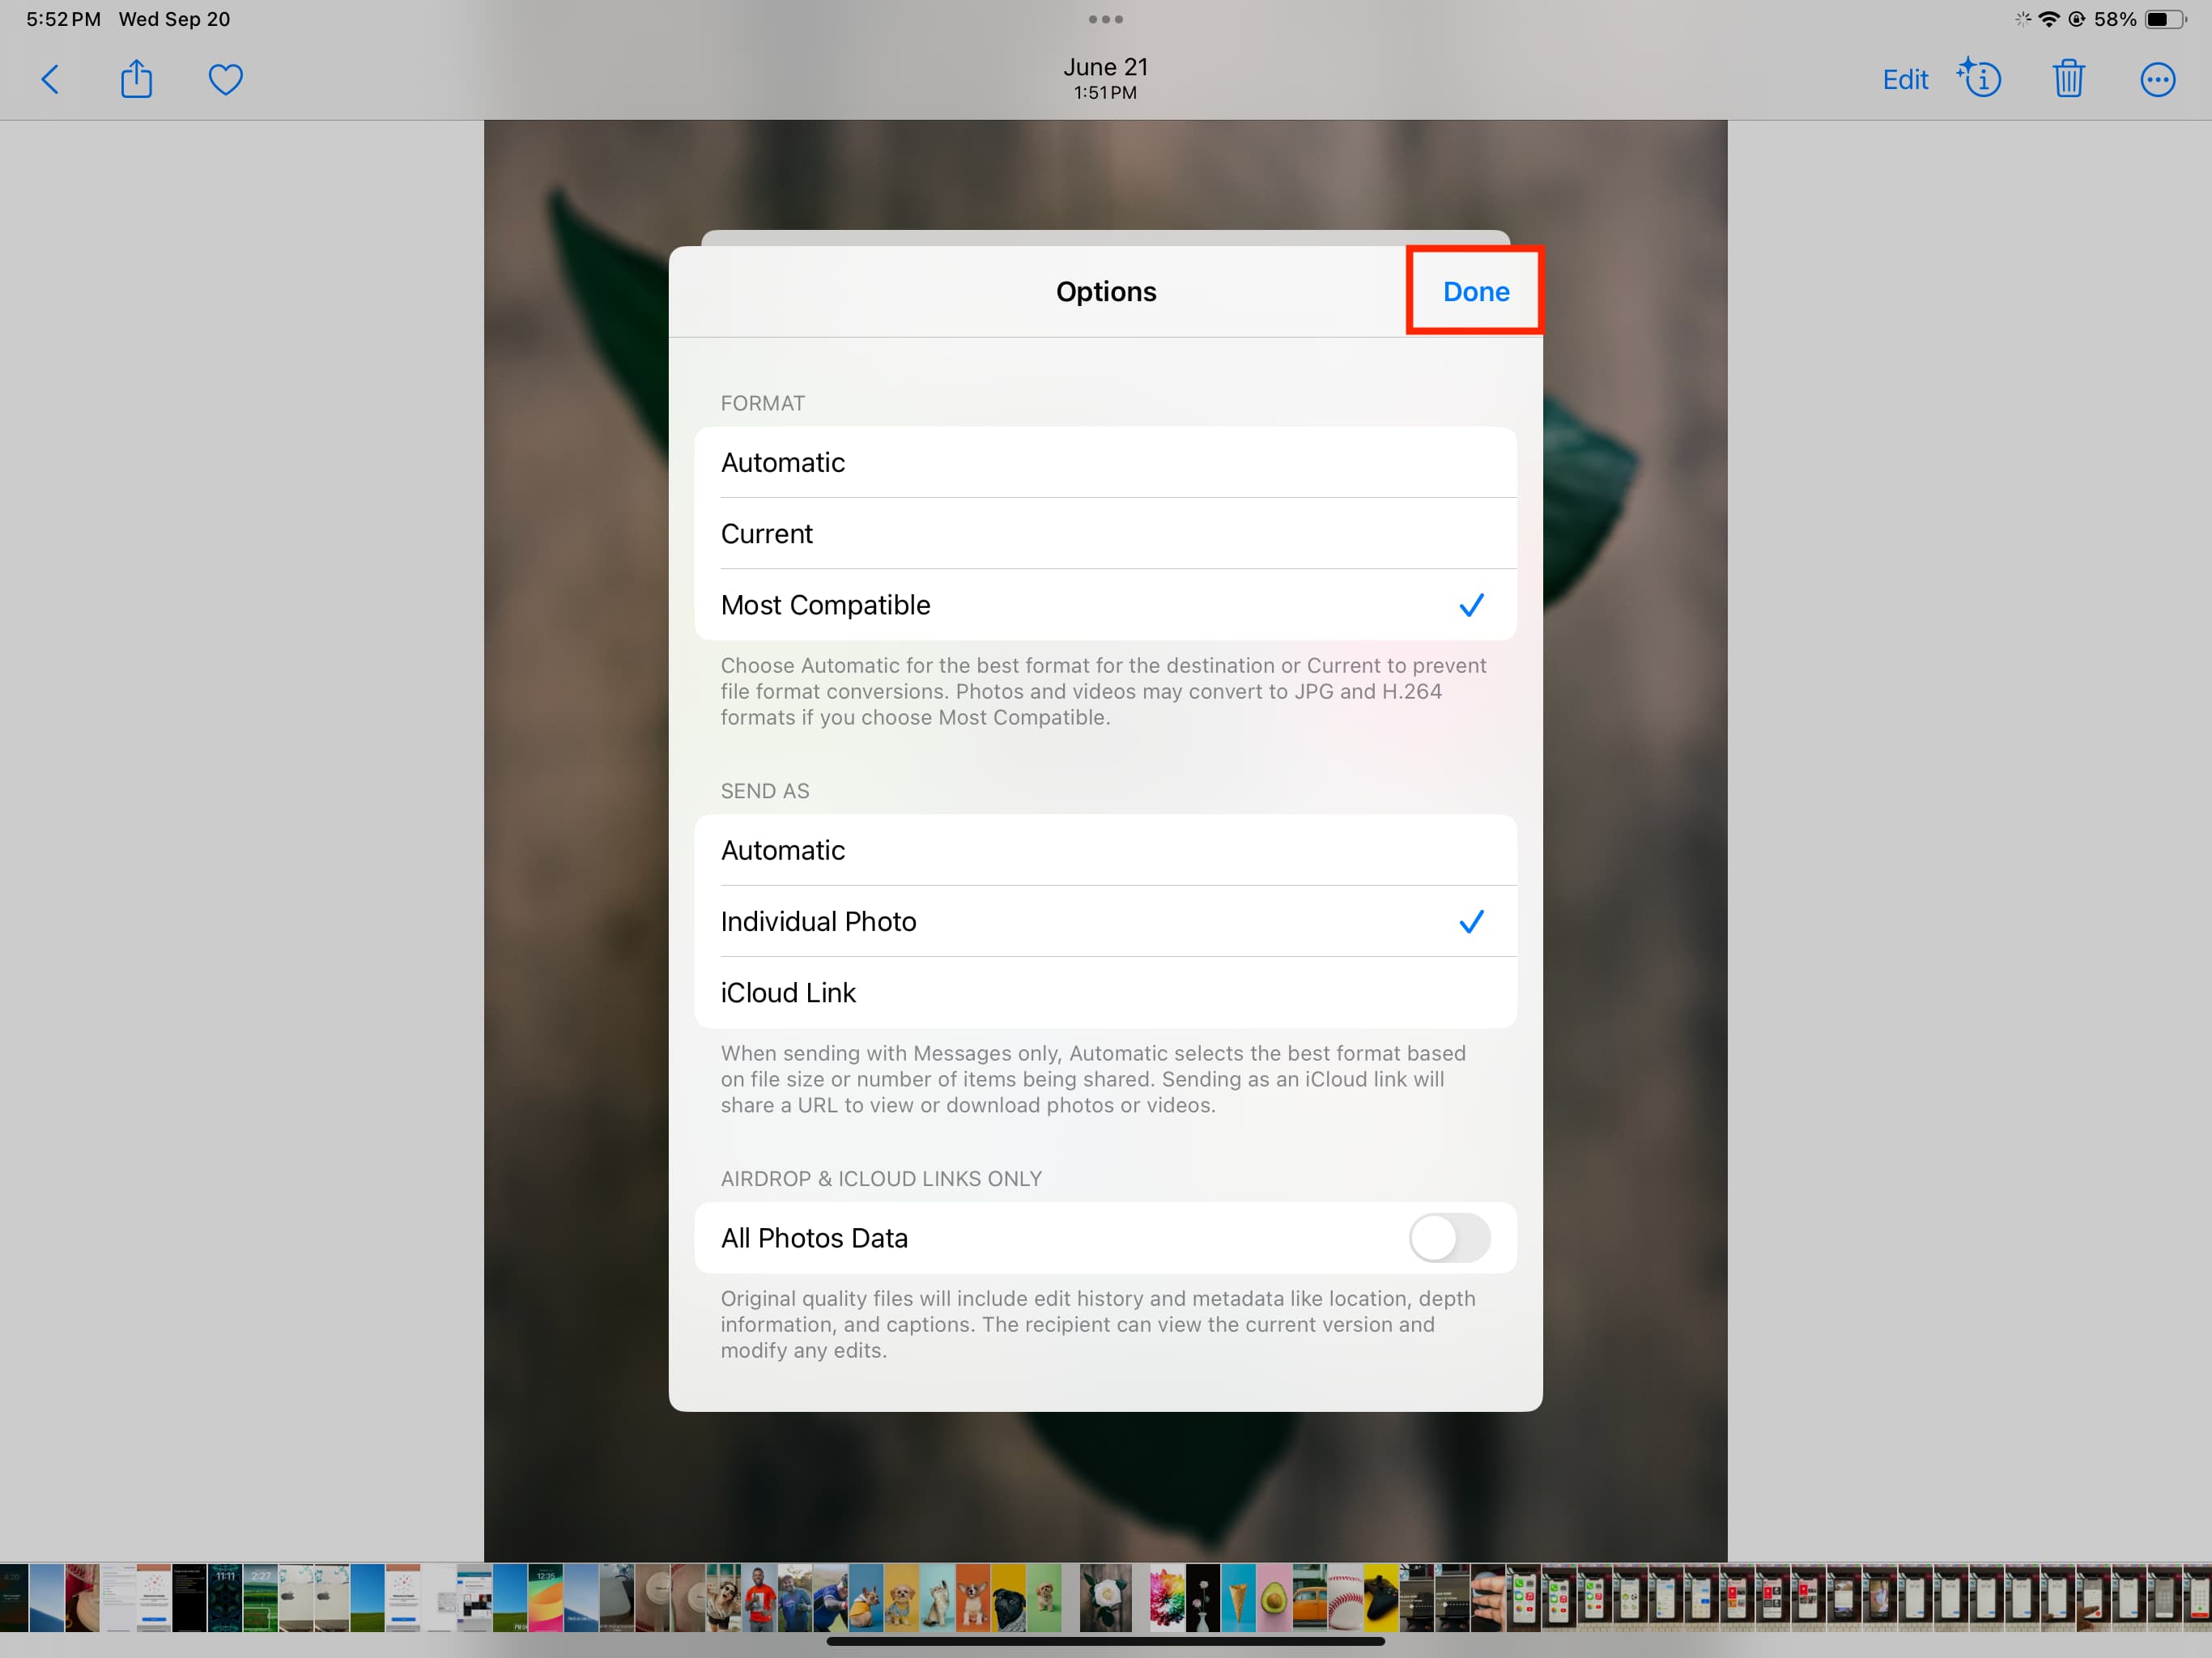 Select Most Compatible format before sharing photo from iPad